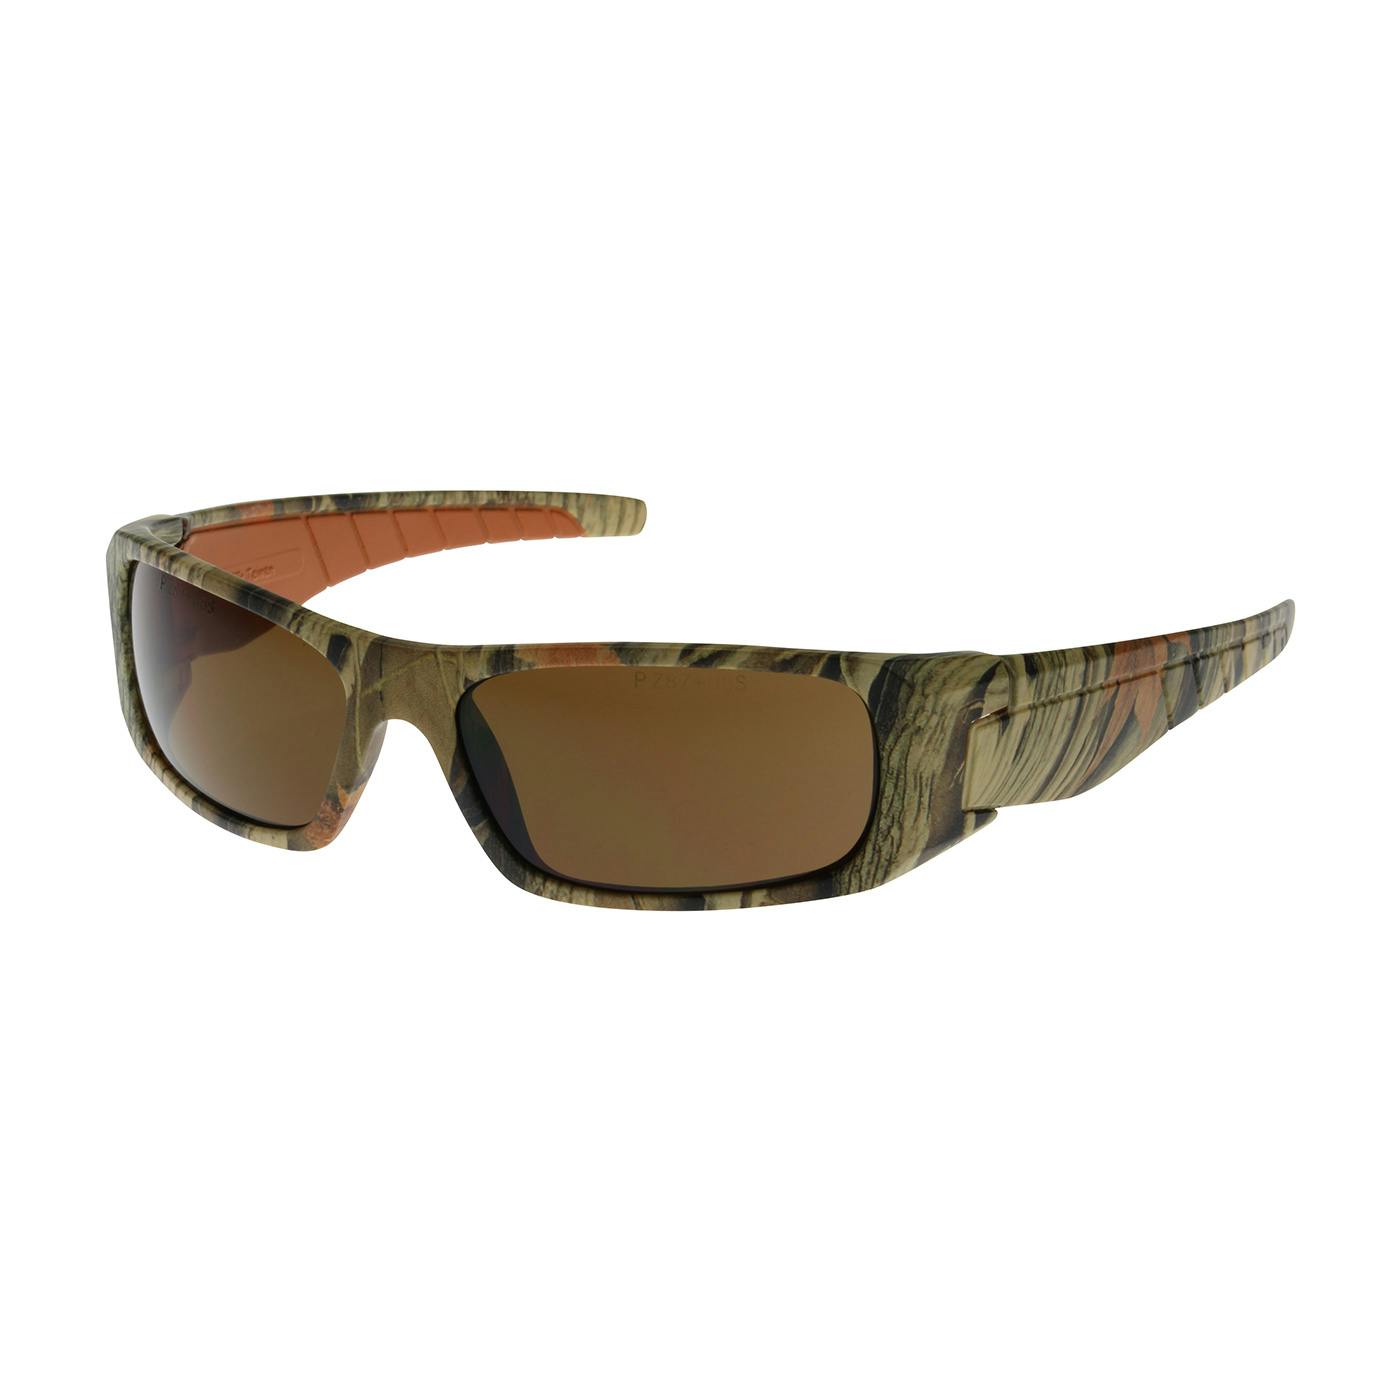 Full Frame Safety Glasses with Camouflage Frame, Brown Lens and Anti-Scratch / Anti-Fog Coating, Camouflage (250-53-1024) - OS_2